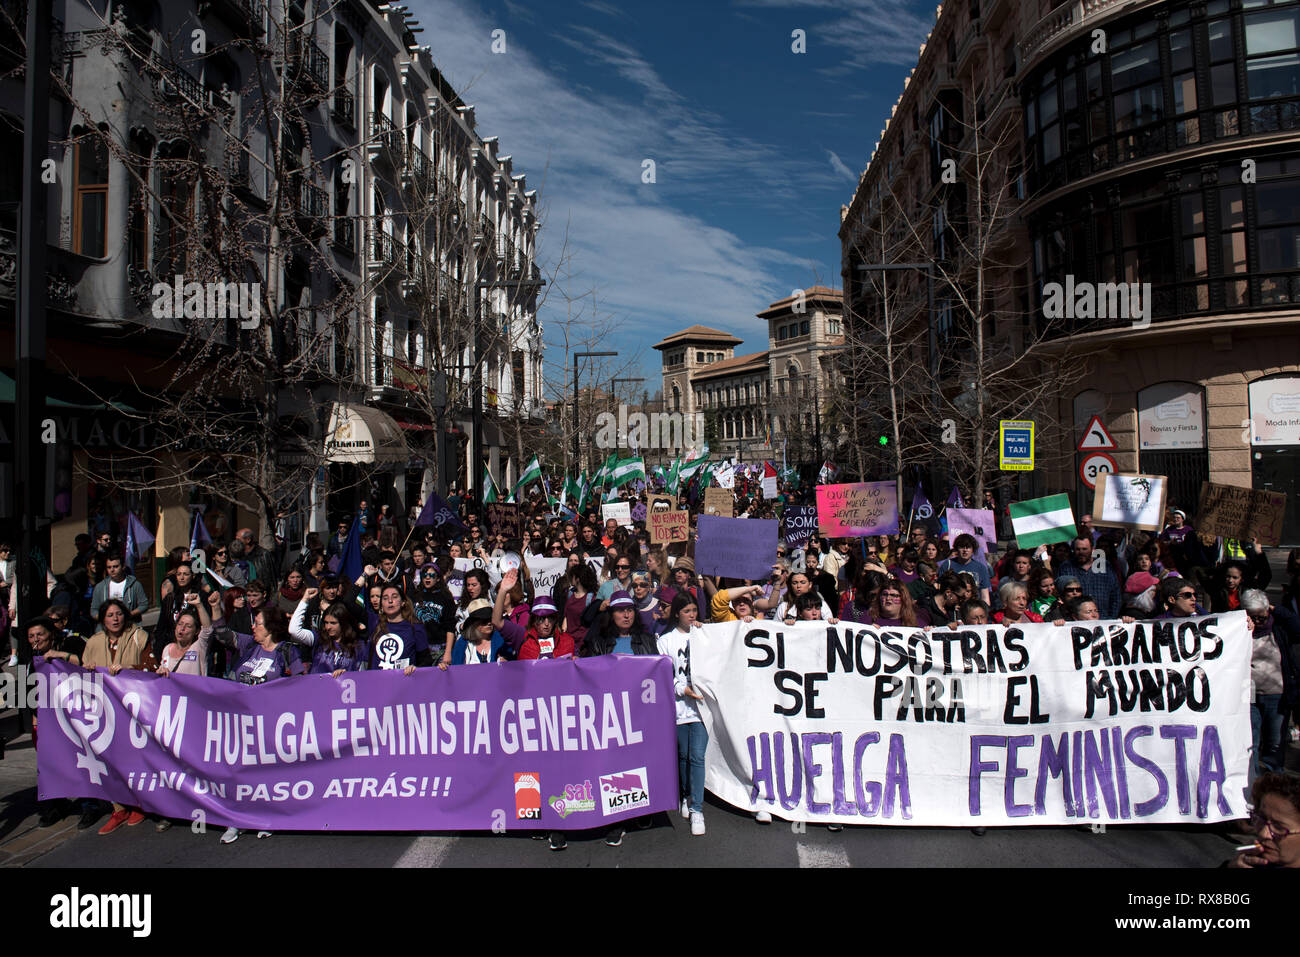 Students seen demonstrating with banners along Gran Via street during the strike. Spanish people celebrate International Women's Day with a women's general strike against gender violence. Stock Photo